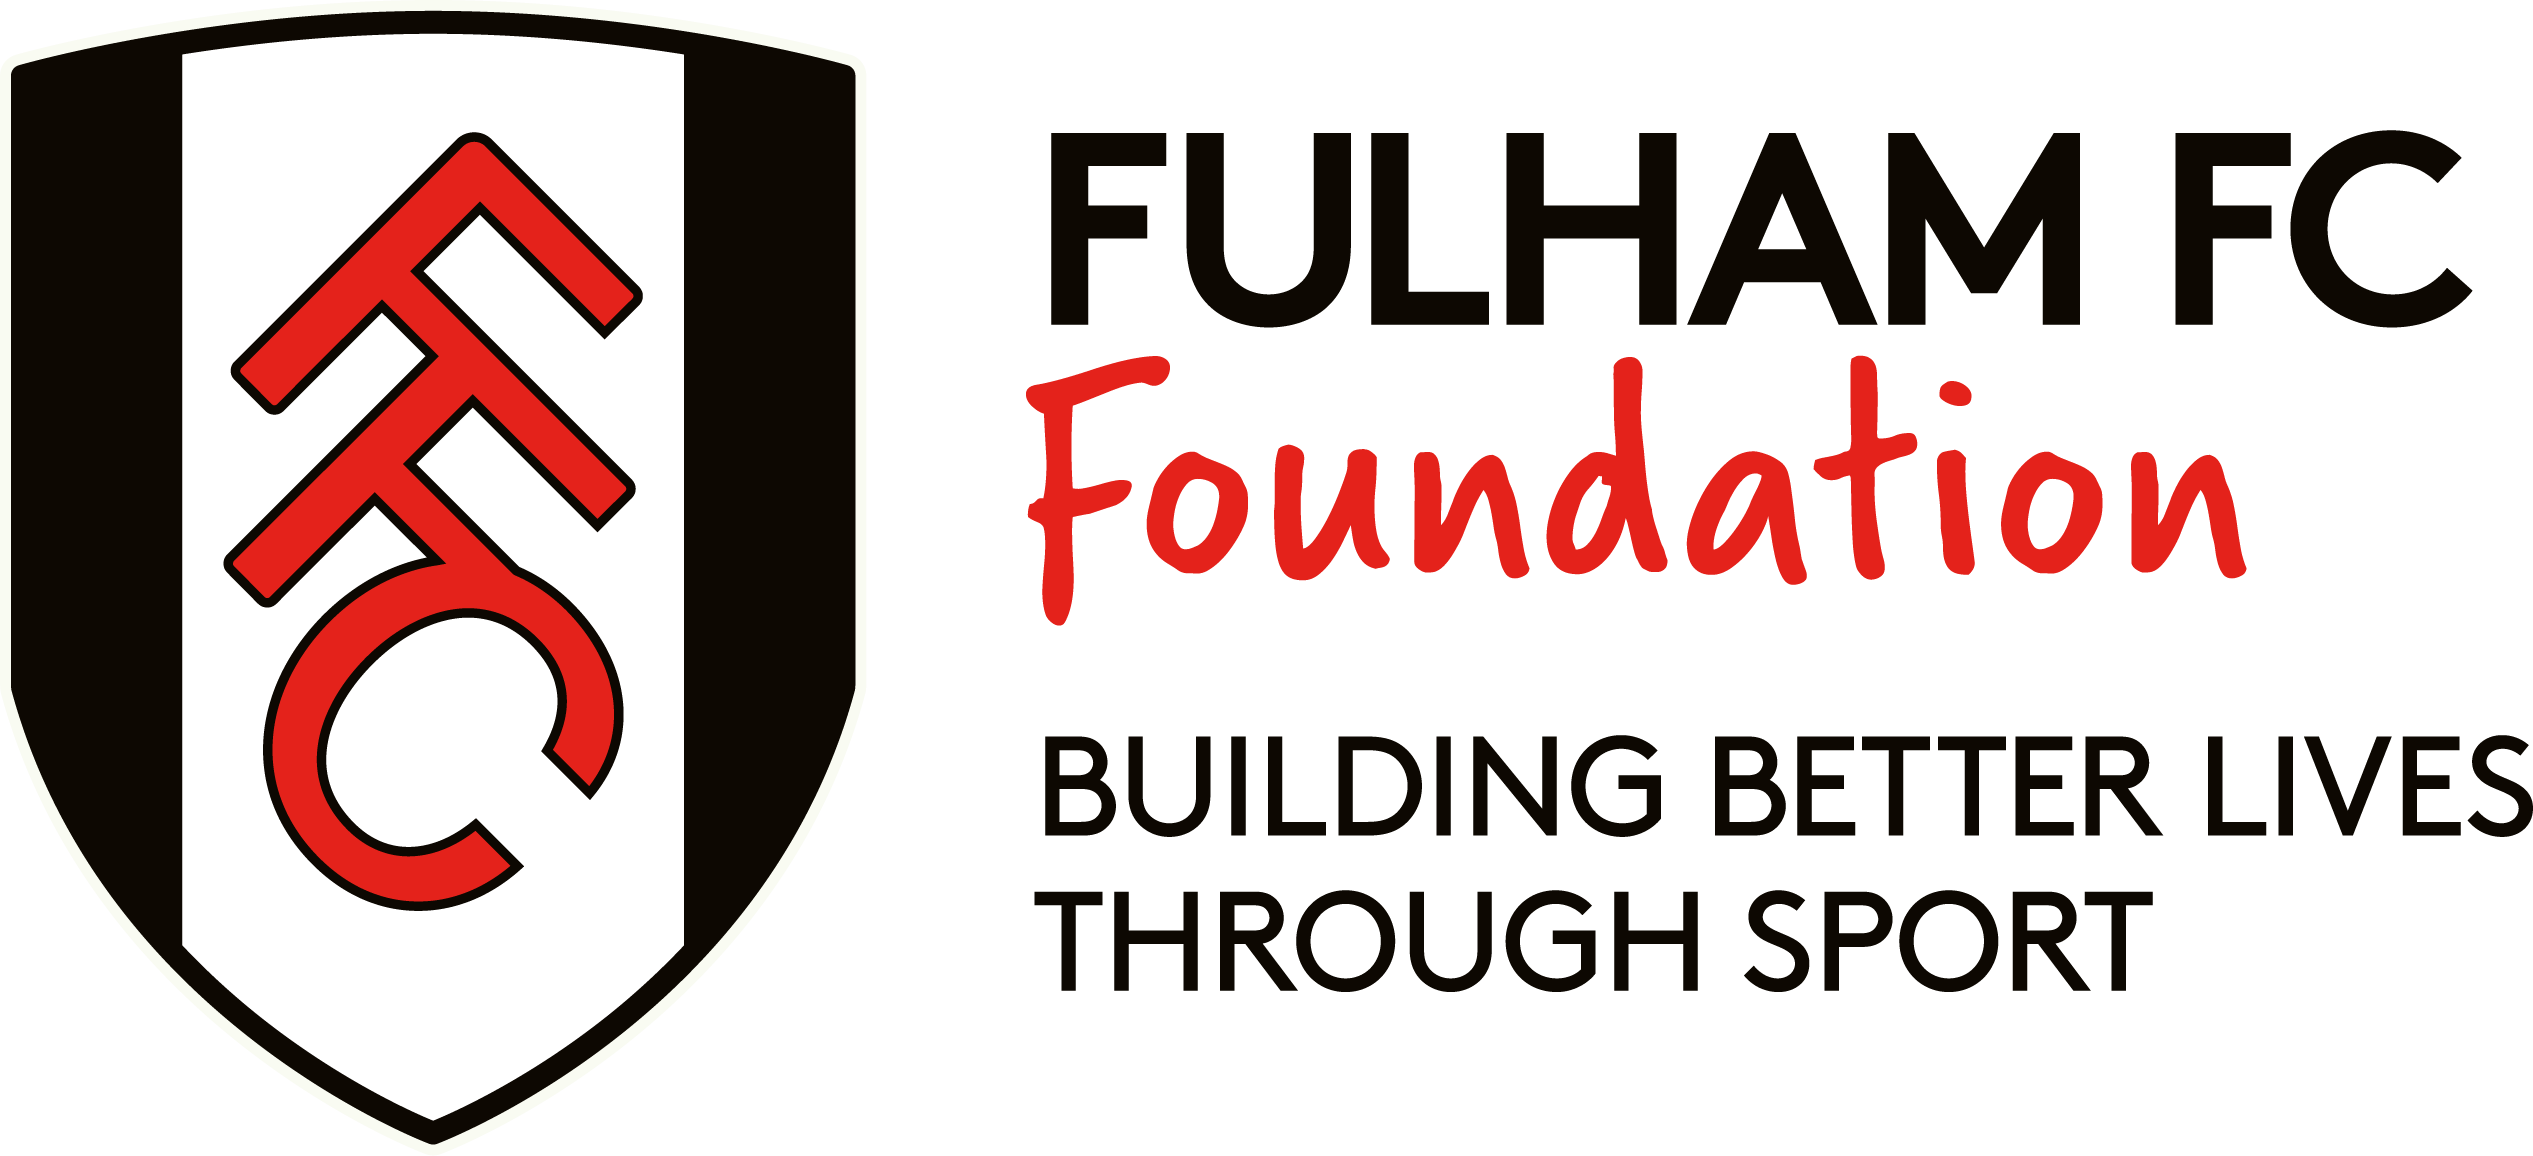 Fulham FC Logo on the left with text on the right "Fulham FC Foundation - Building better lives though sport"